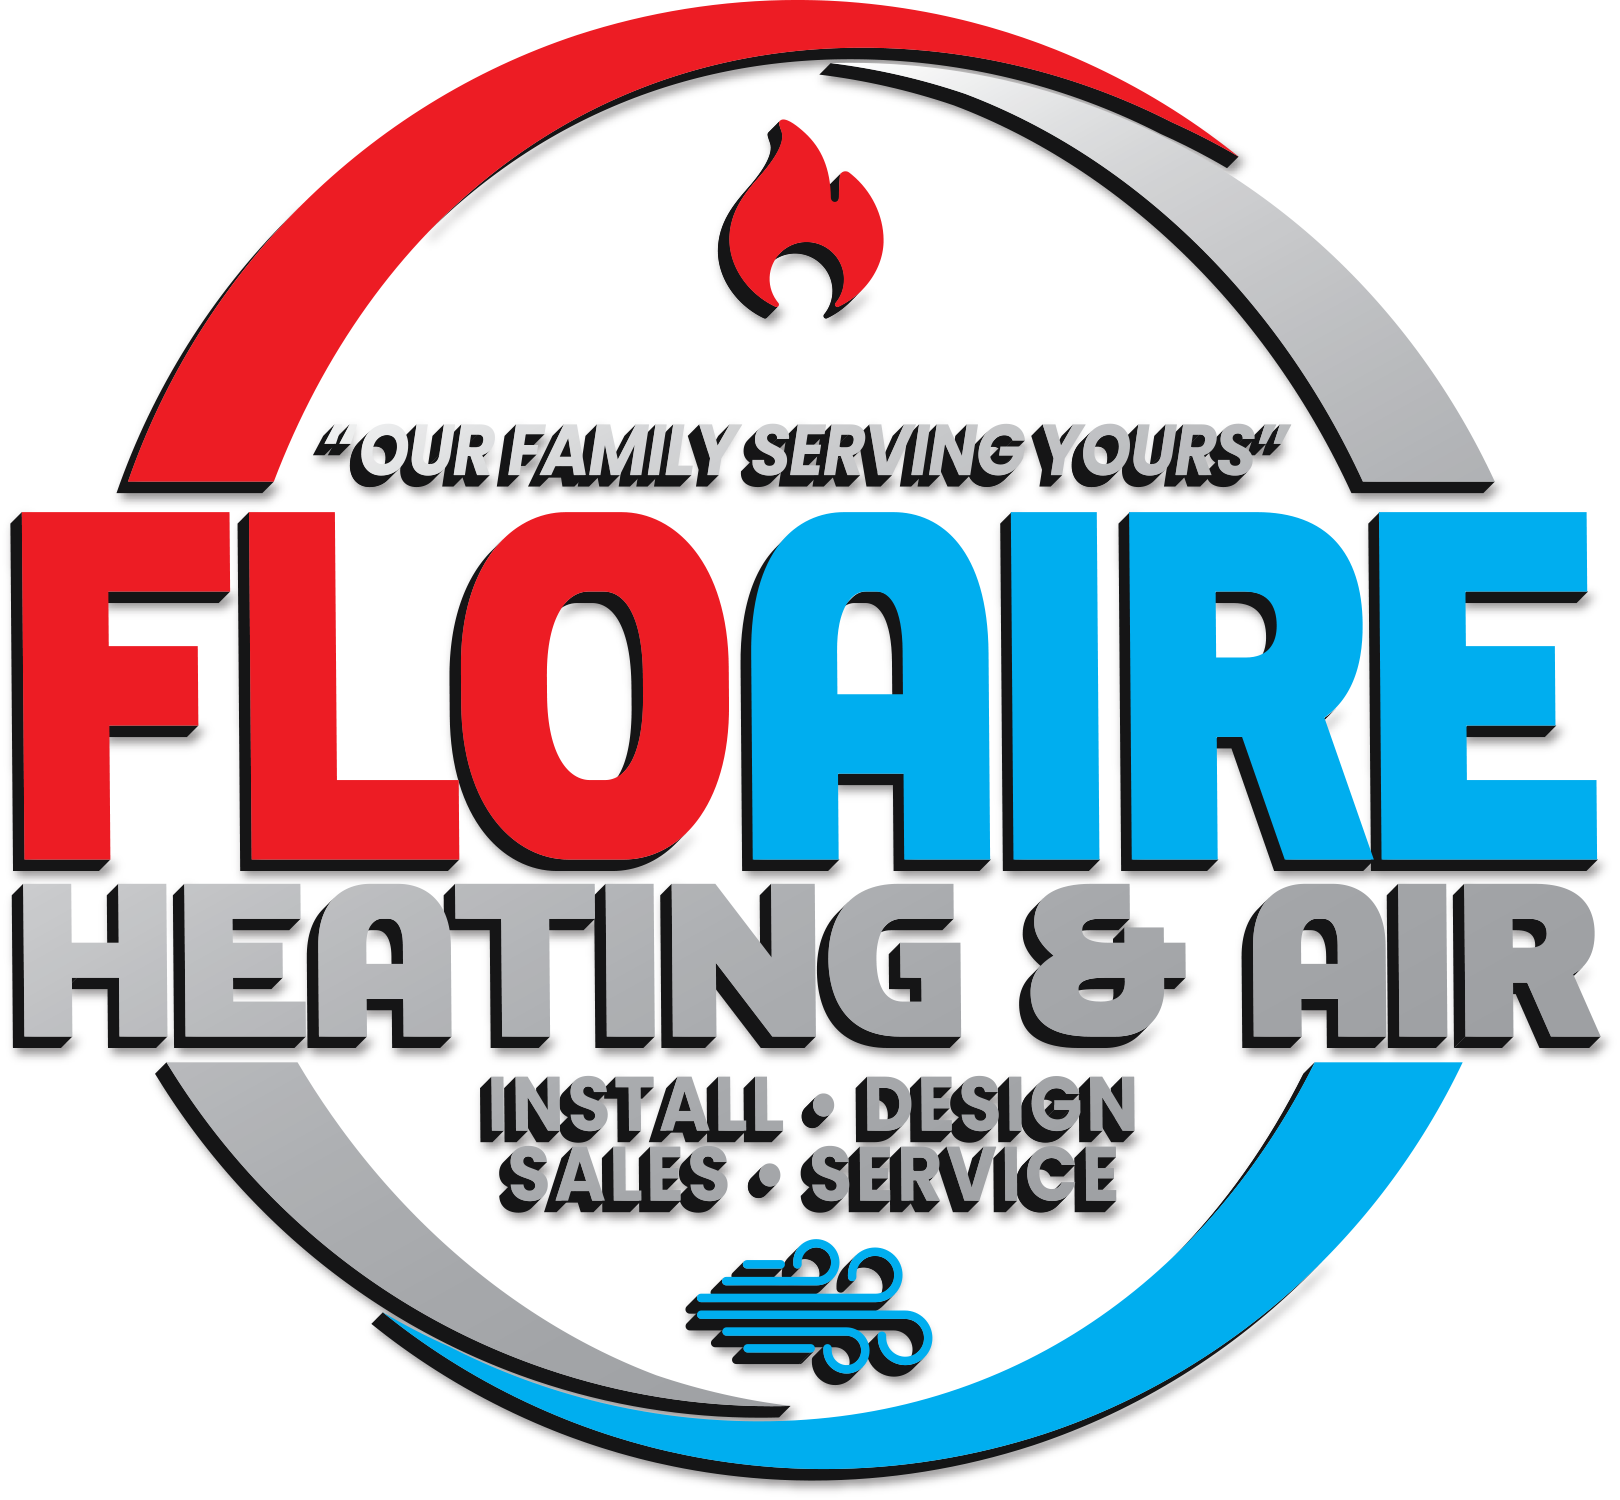 A logo for floaire heating and air that says 